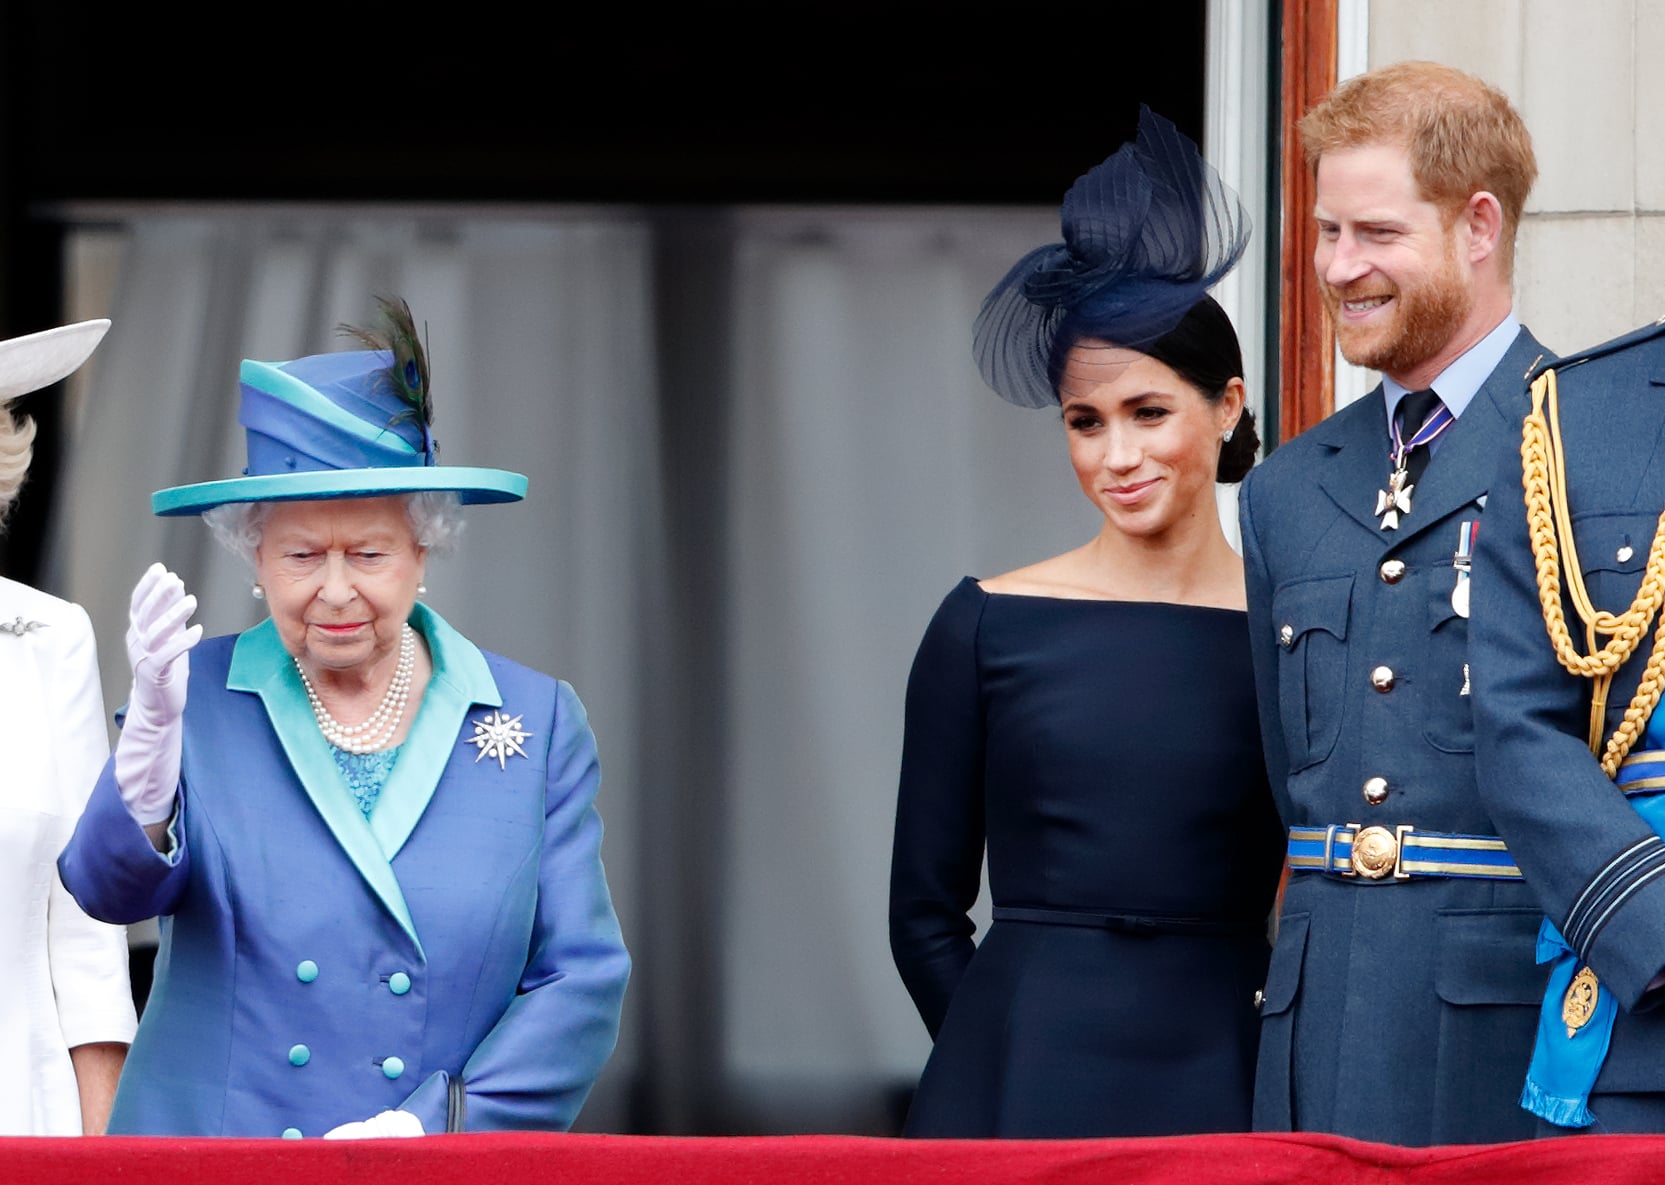 LONDON, UNITED KINGDOM - JULY 10: (EMBARGOED FOR PUBLICATION IN UK NEWSPAPERS UNTIL 24 HOURS AFTER CREATE DATE AND TIME) Queen Elizabeth II, Meghan, Duchess of Sussex and Prince Harry, Duke of Sussex watch a flypast to mark the centenary of the Royal Air Force from the balcony of Buckingham Palace on July 10, 2018 in London, England. The 100th birthday of the RAF, which was founded on on 1 April 1918, was marked with a centenary parade with the presentation of a new Queen